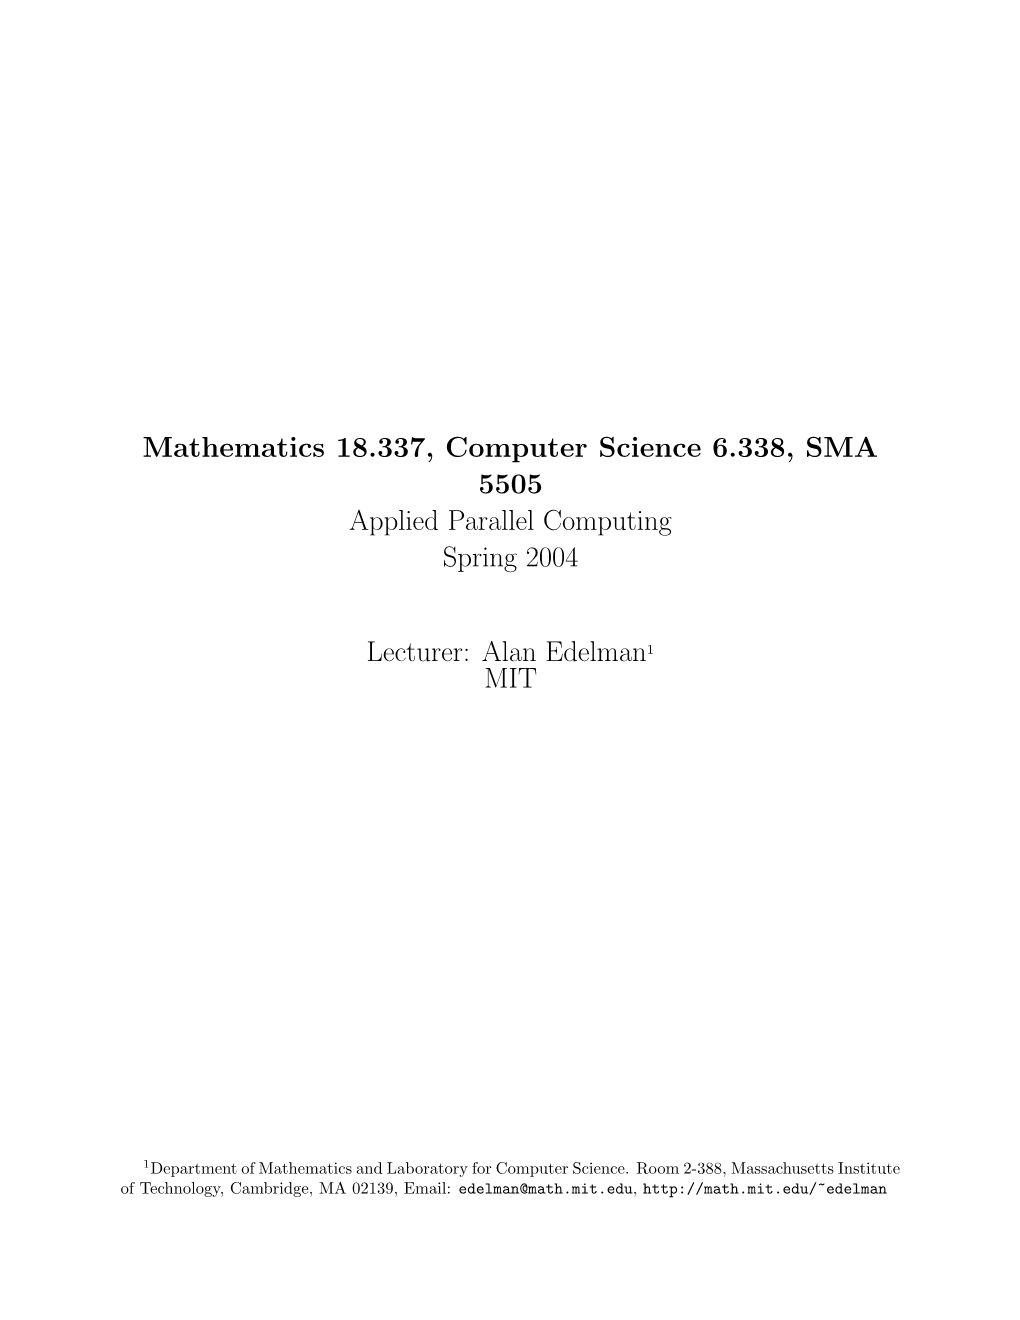 Mathematics 18.337, Computer Science 6.338, SMA 5505 Applied Parallel Computing Spring 2004